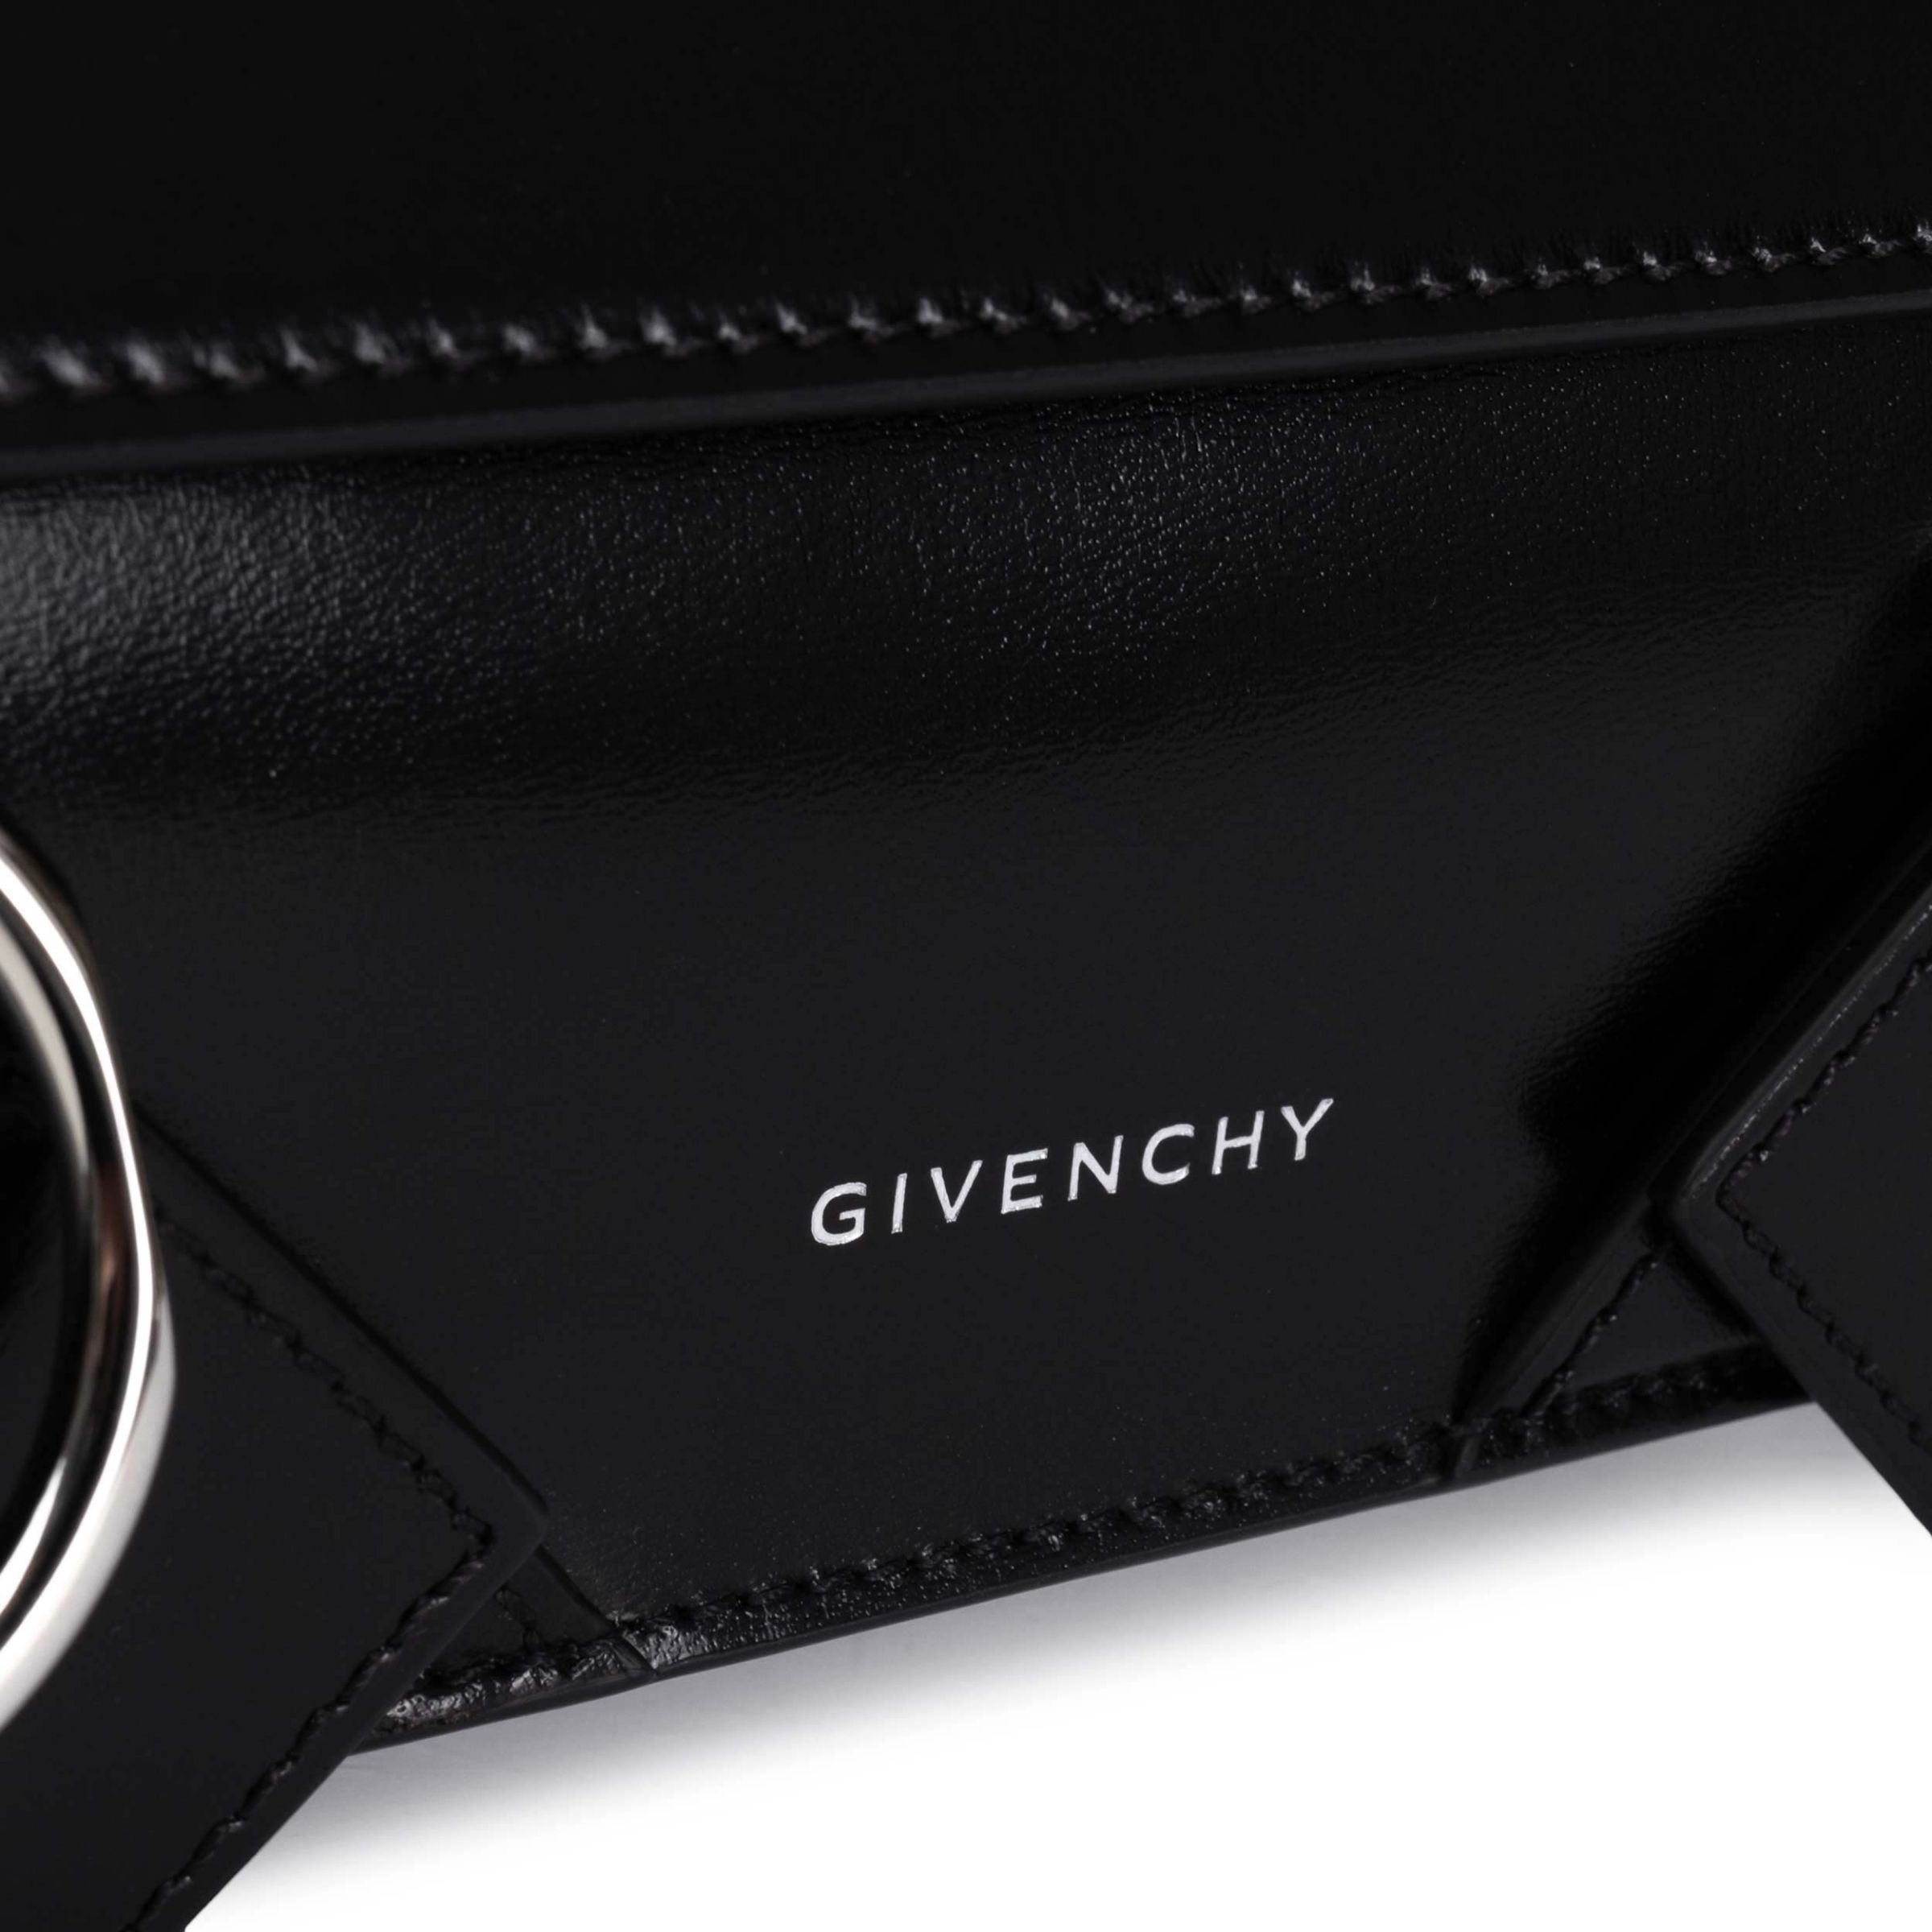 Сумка Givenchy Voyou чорна